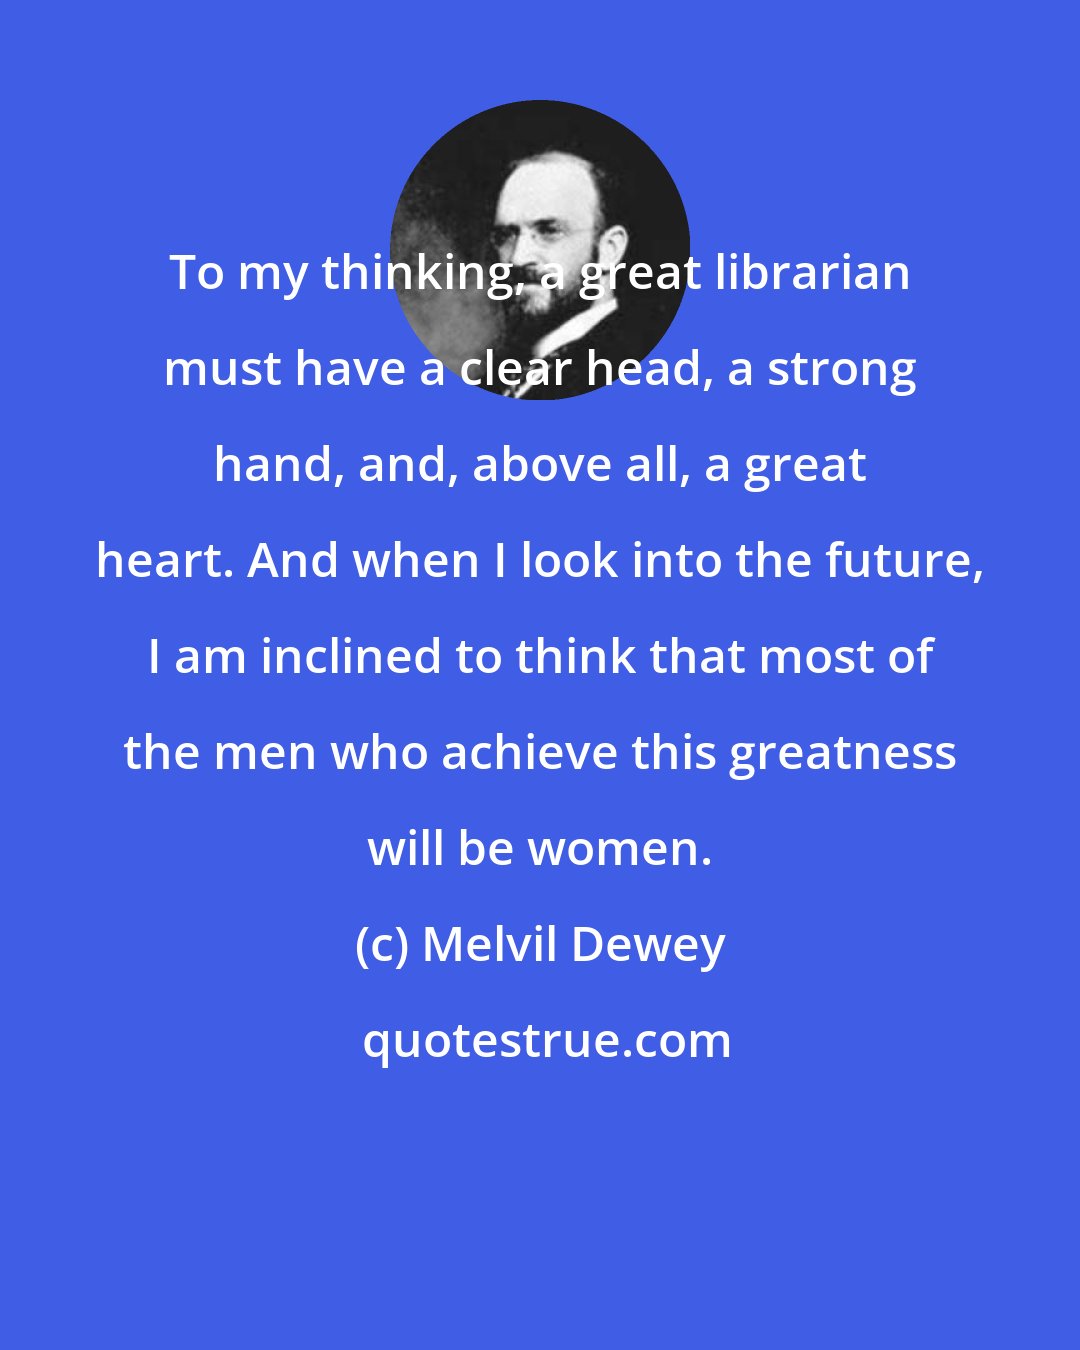 Melvil Dewey: To my thinking, a great librarian must have a clear head, a strong hand, and, above all, a great heart. And when I look into the future, I am inclined to think that most of the men who achieve this greatness will be women.